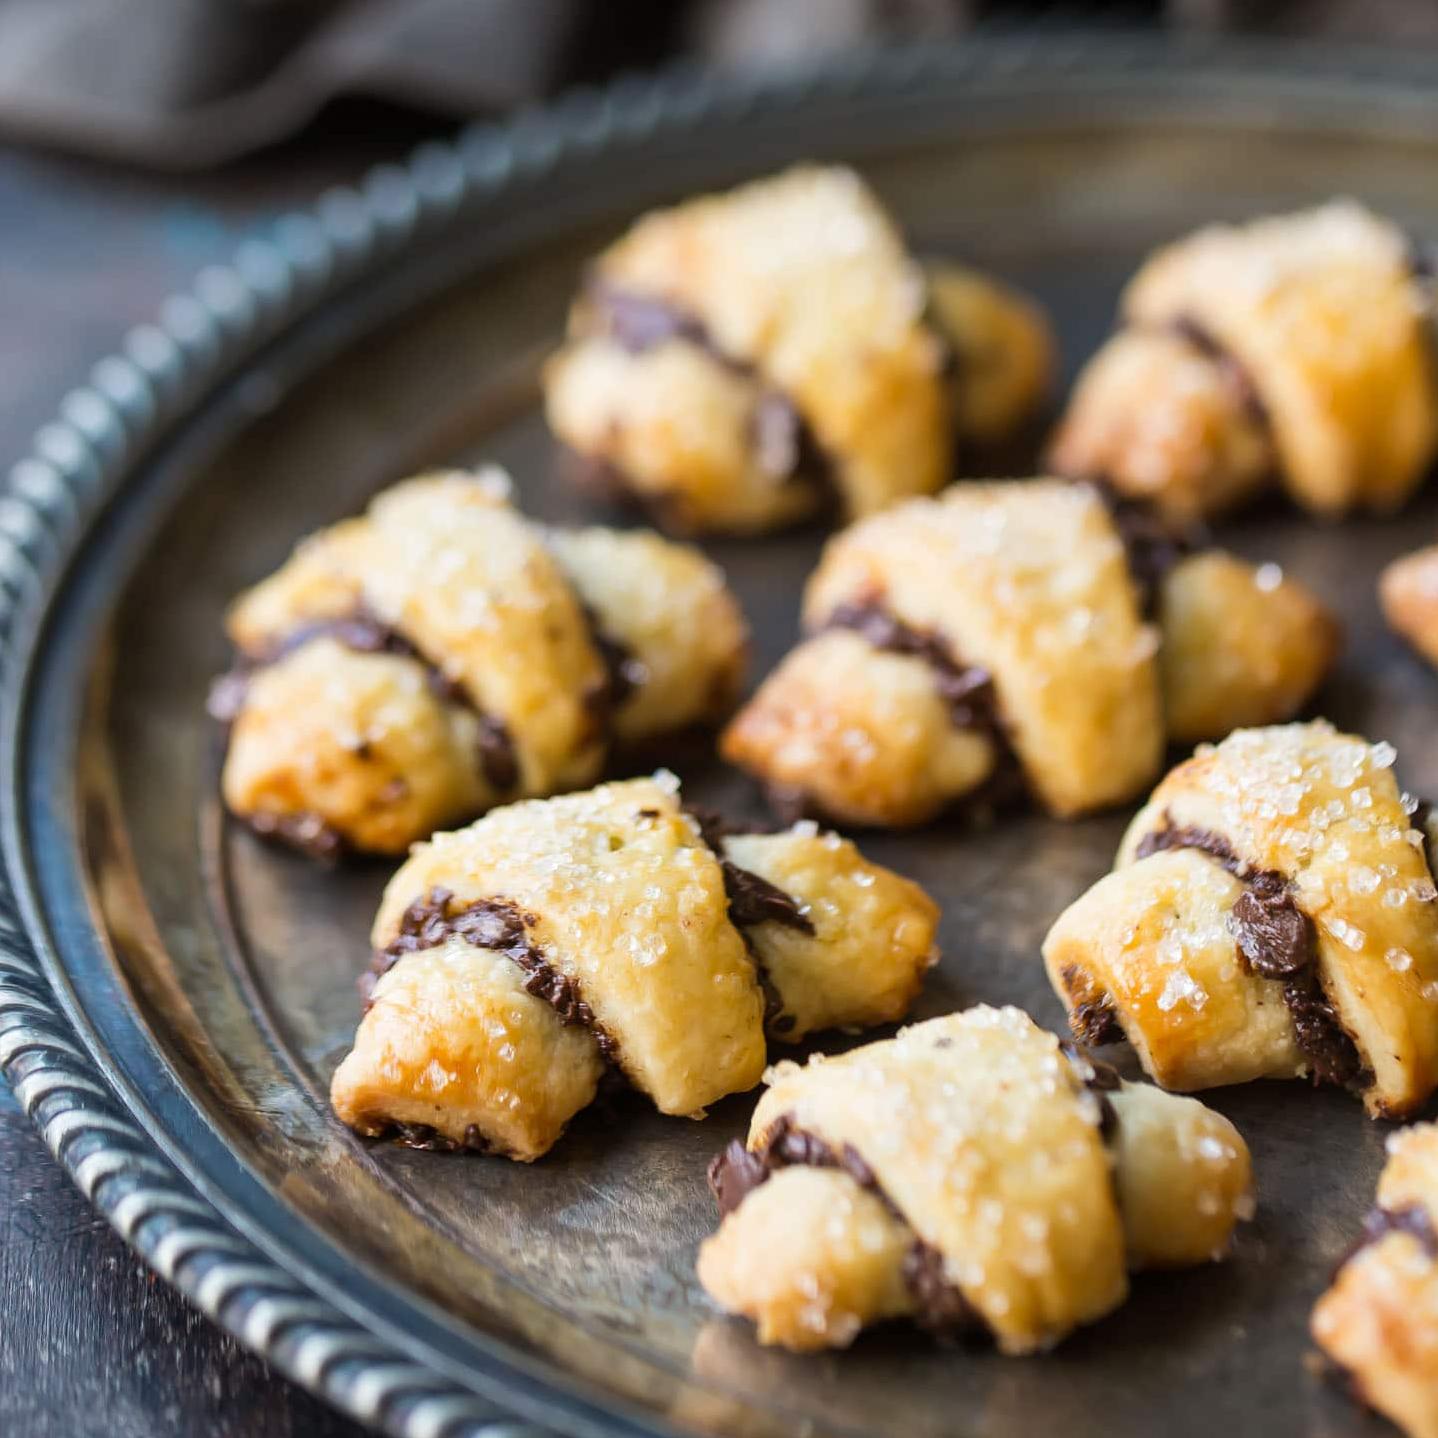  These rugelach are a perfect balance of sweetness and spiciness that will make your taste buds dance.